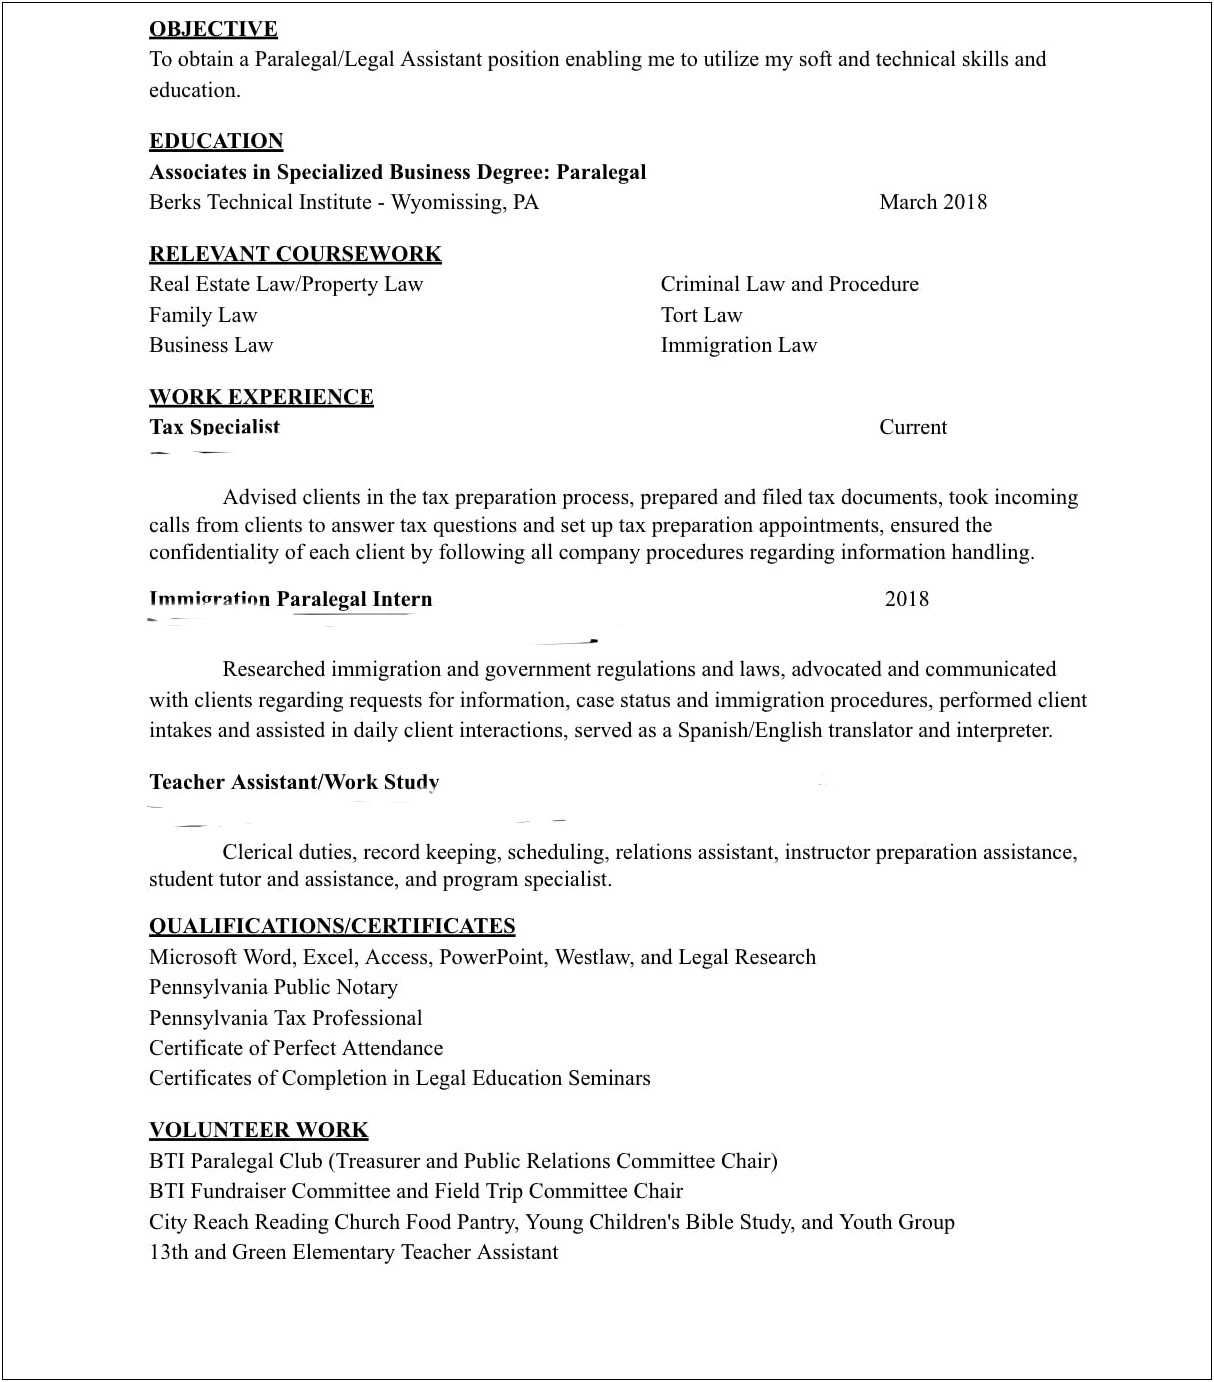 Resume Cover Letter For Legal Assistant